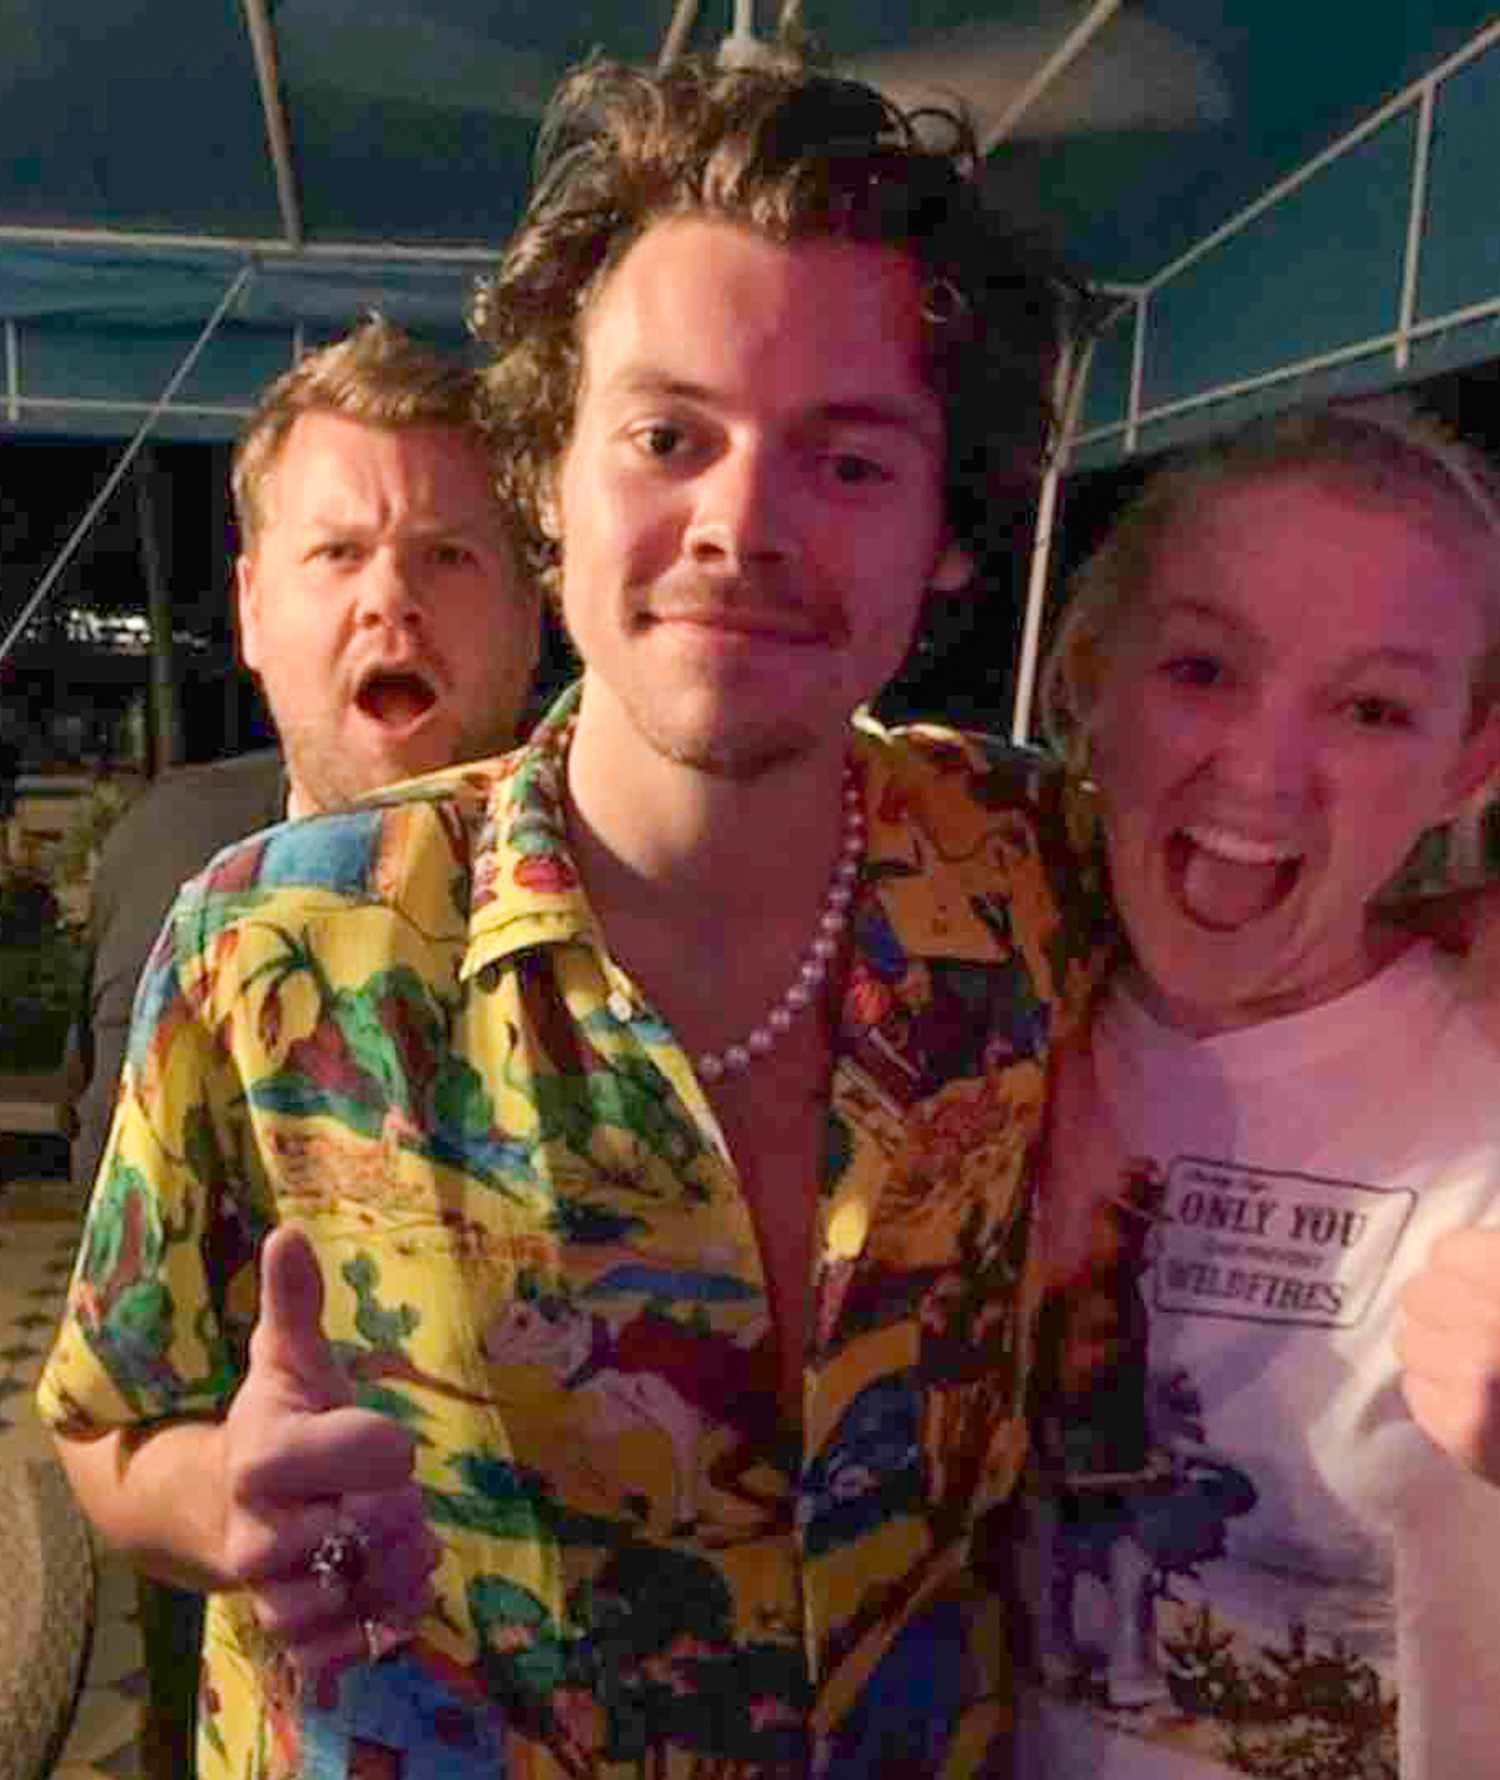 EXCLUSIVE: Singer Harry Styles And Comedian Pal James Corden Party It Up With Family And Friends At The Caribbean Fish Market Restaurant On St Thomas In The Virgin Islands